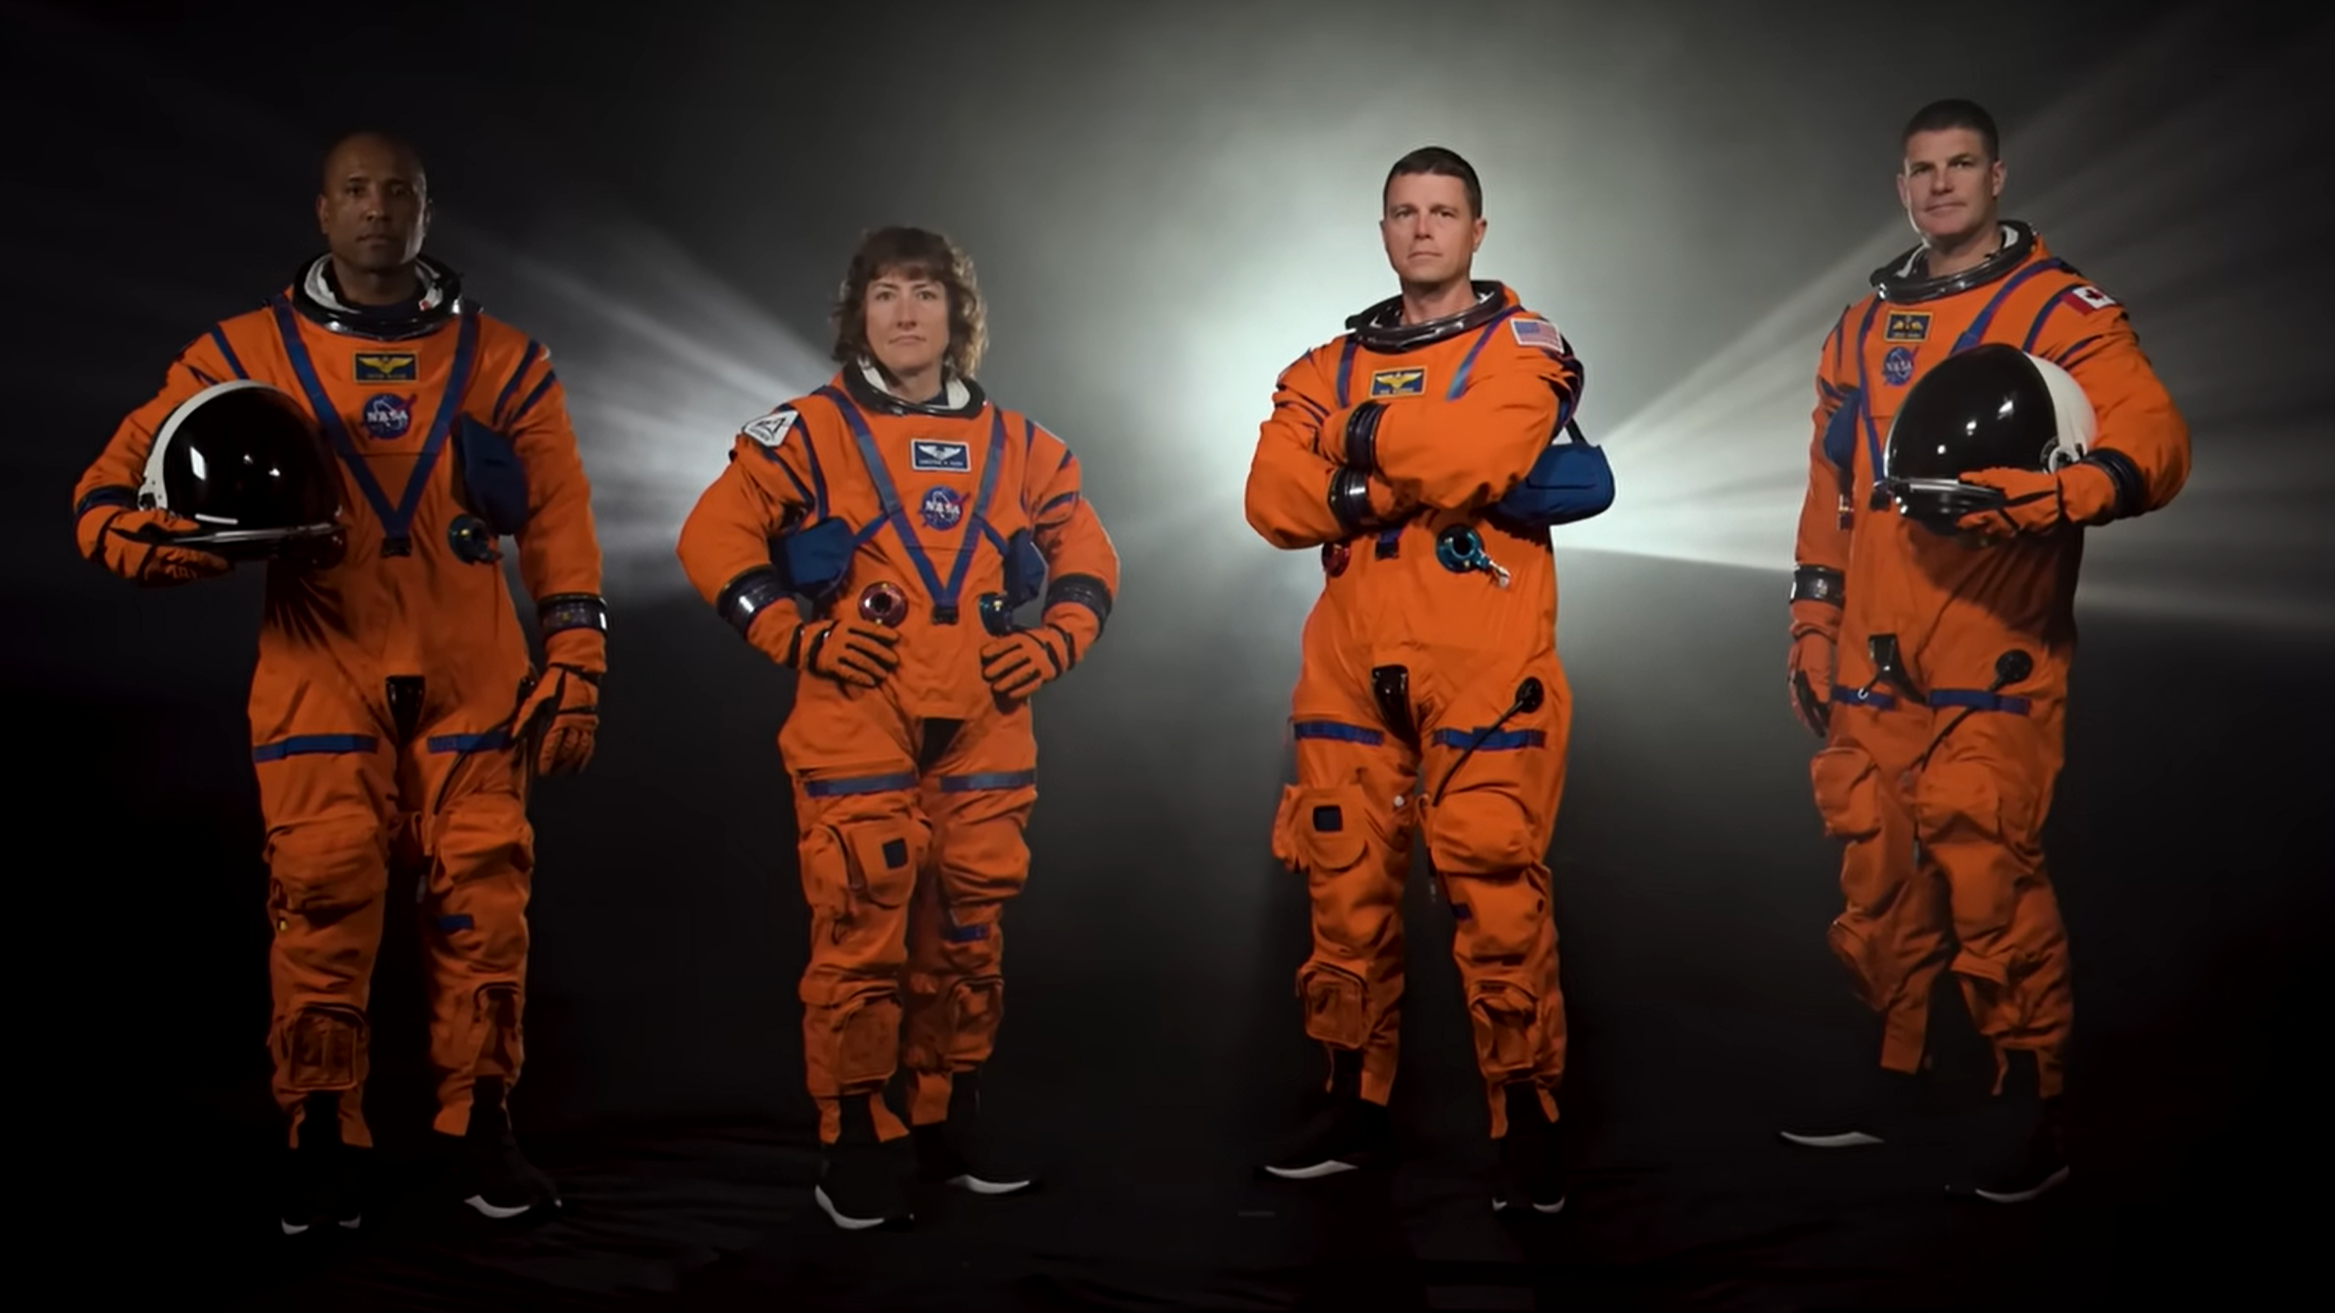 four astronauts standing in a row with a dramatic spotlight behind them. the astronauts wear orange flight suits